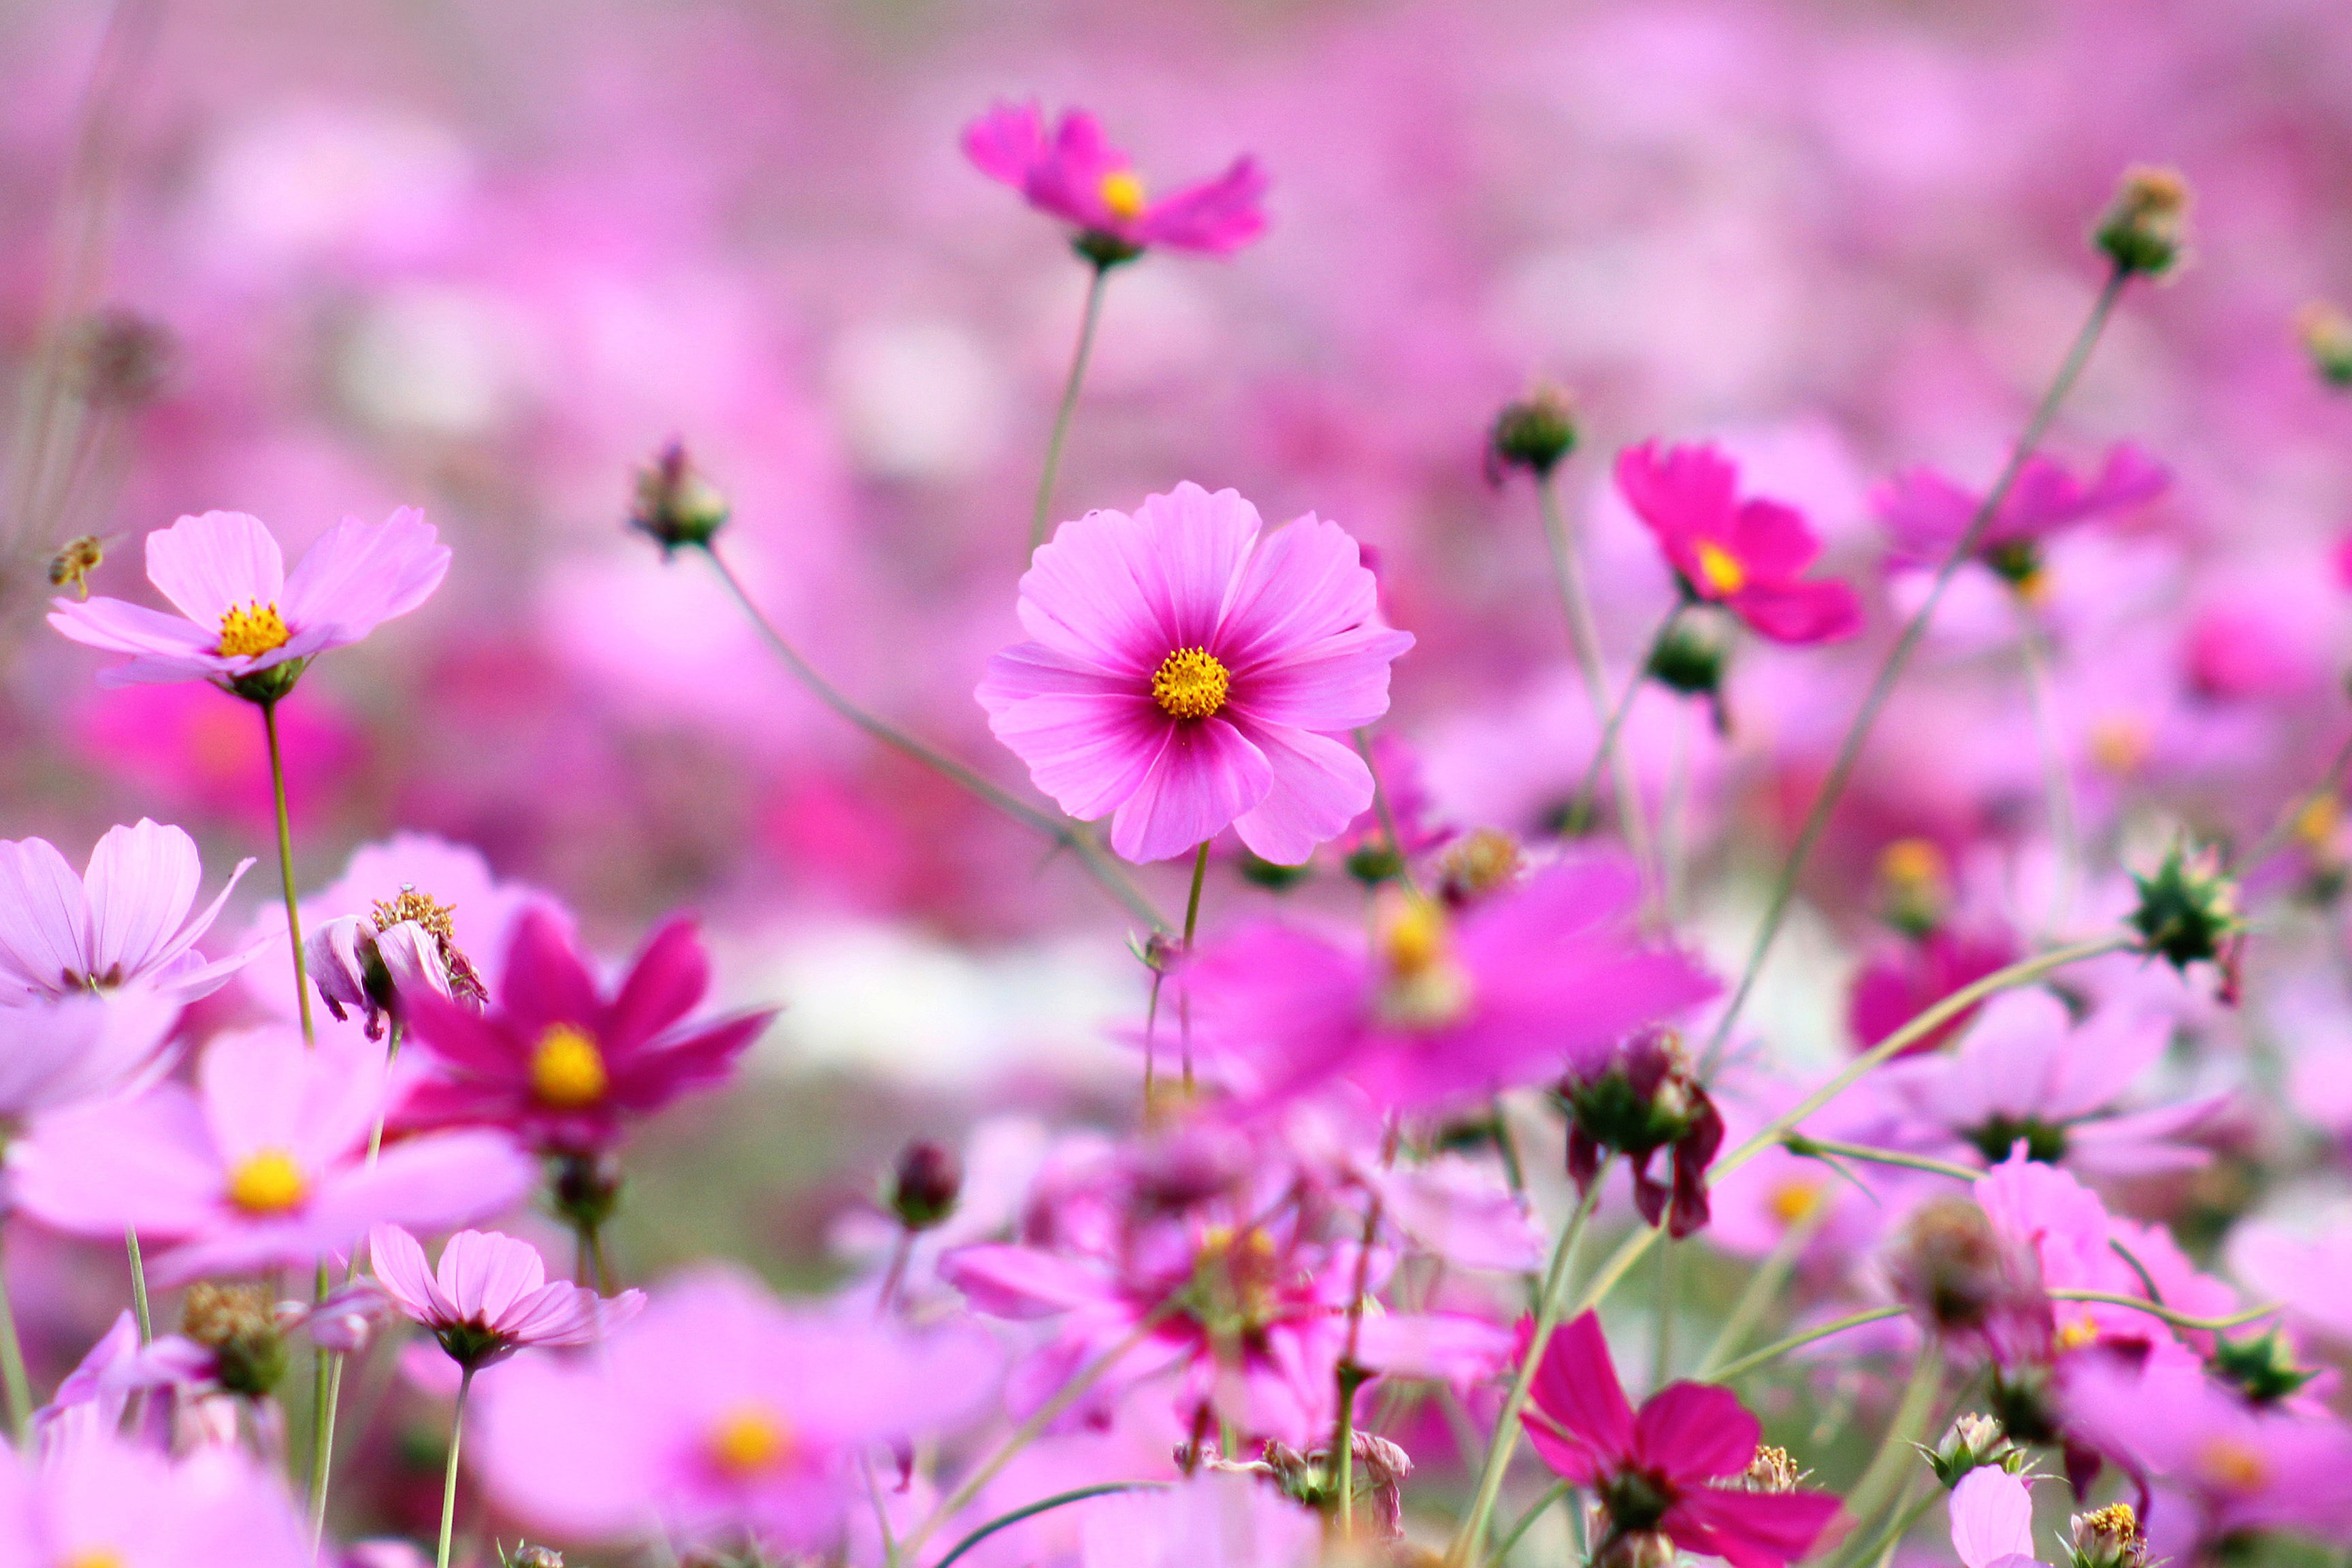 Pink Little Flowers Wallpapers   3456x2304   1831486